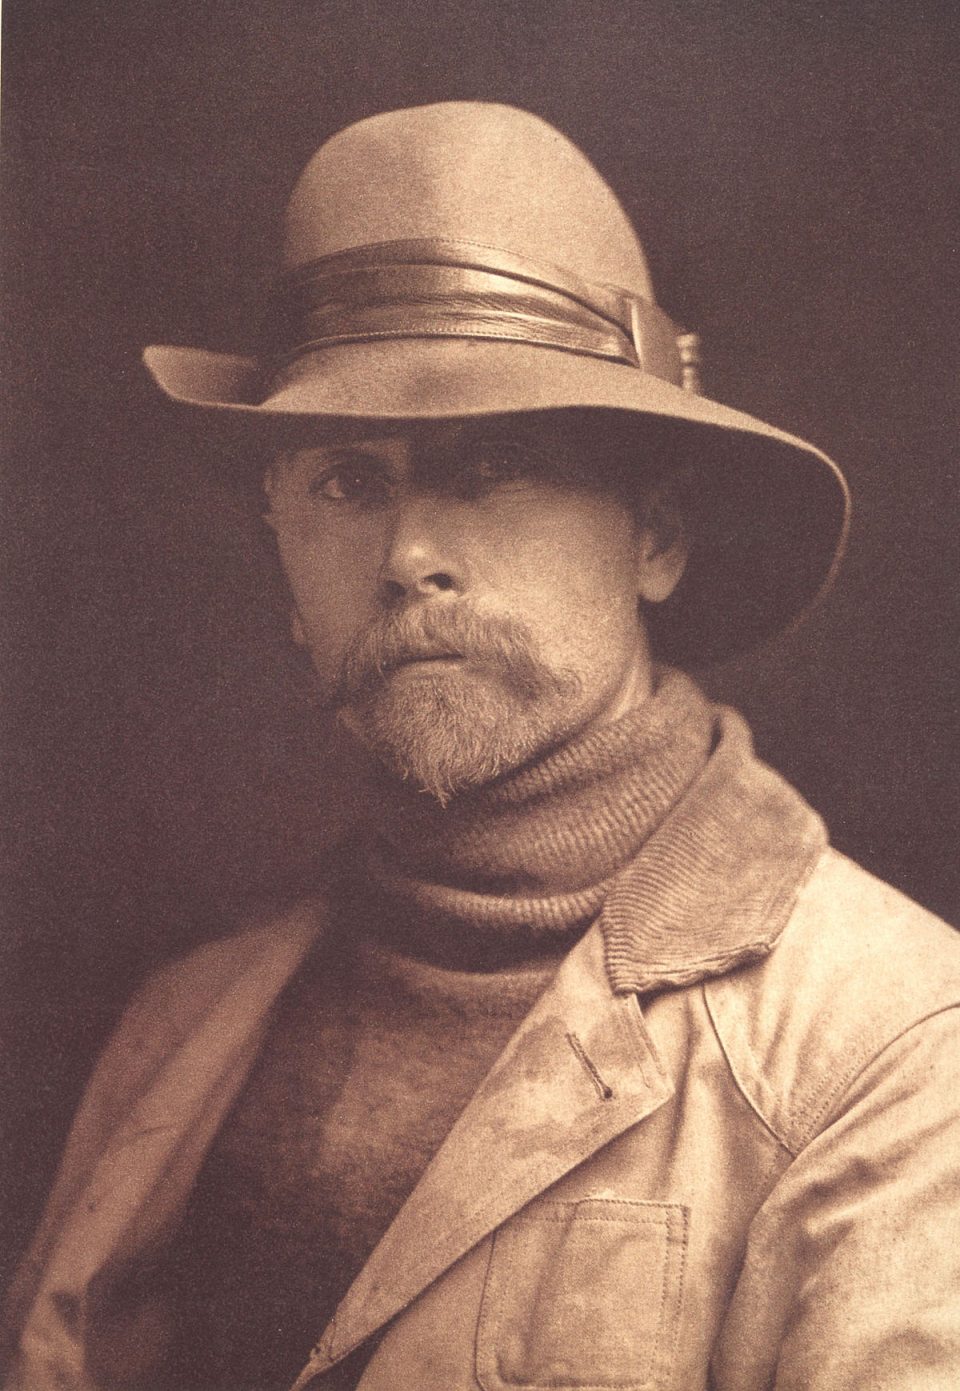 Self-portrait of Edward S. Curtis made in 1906